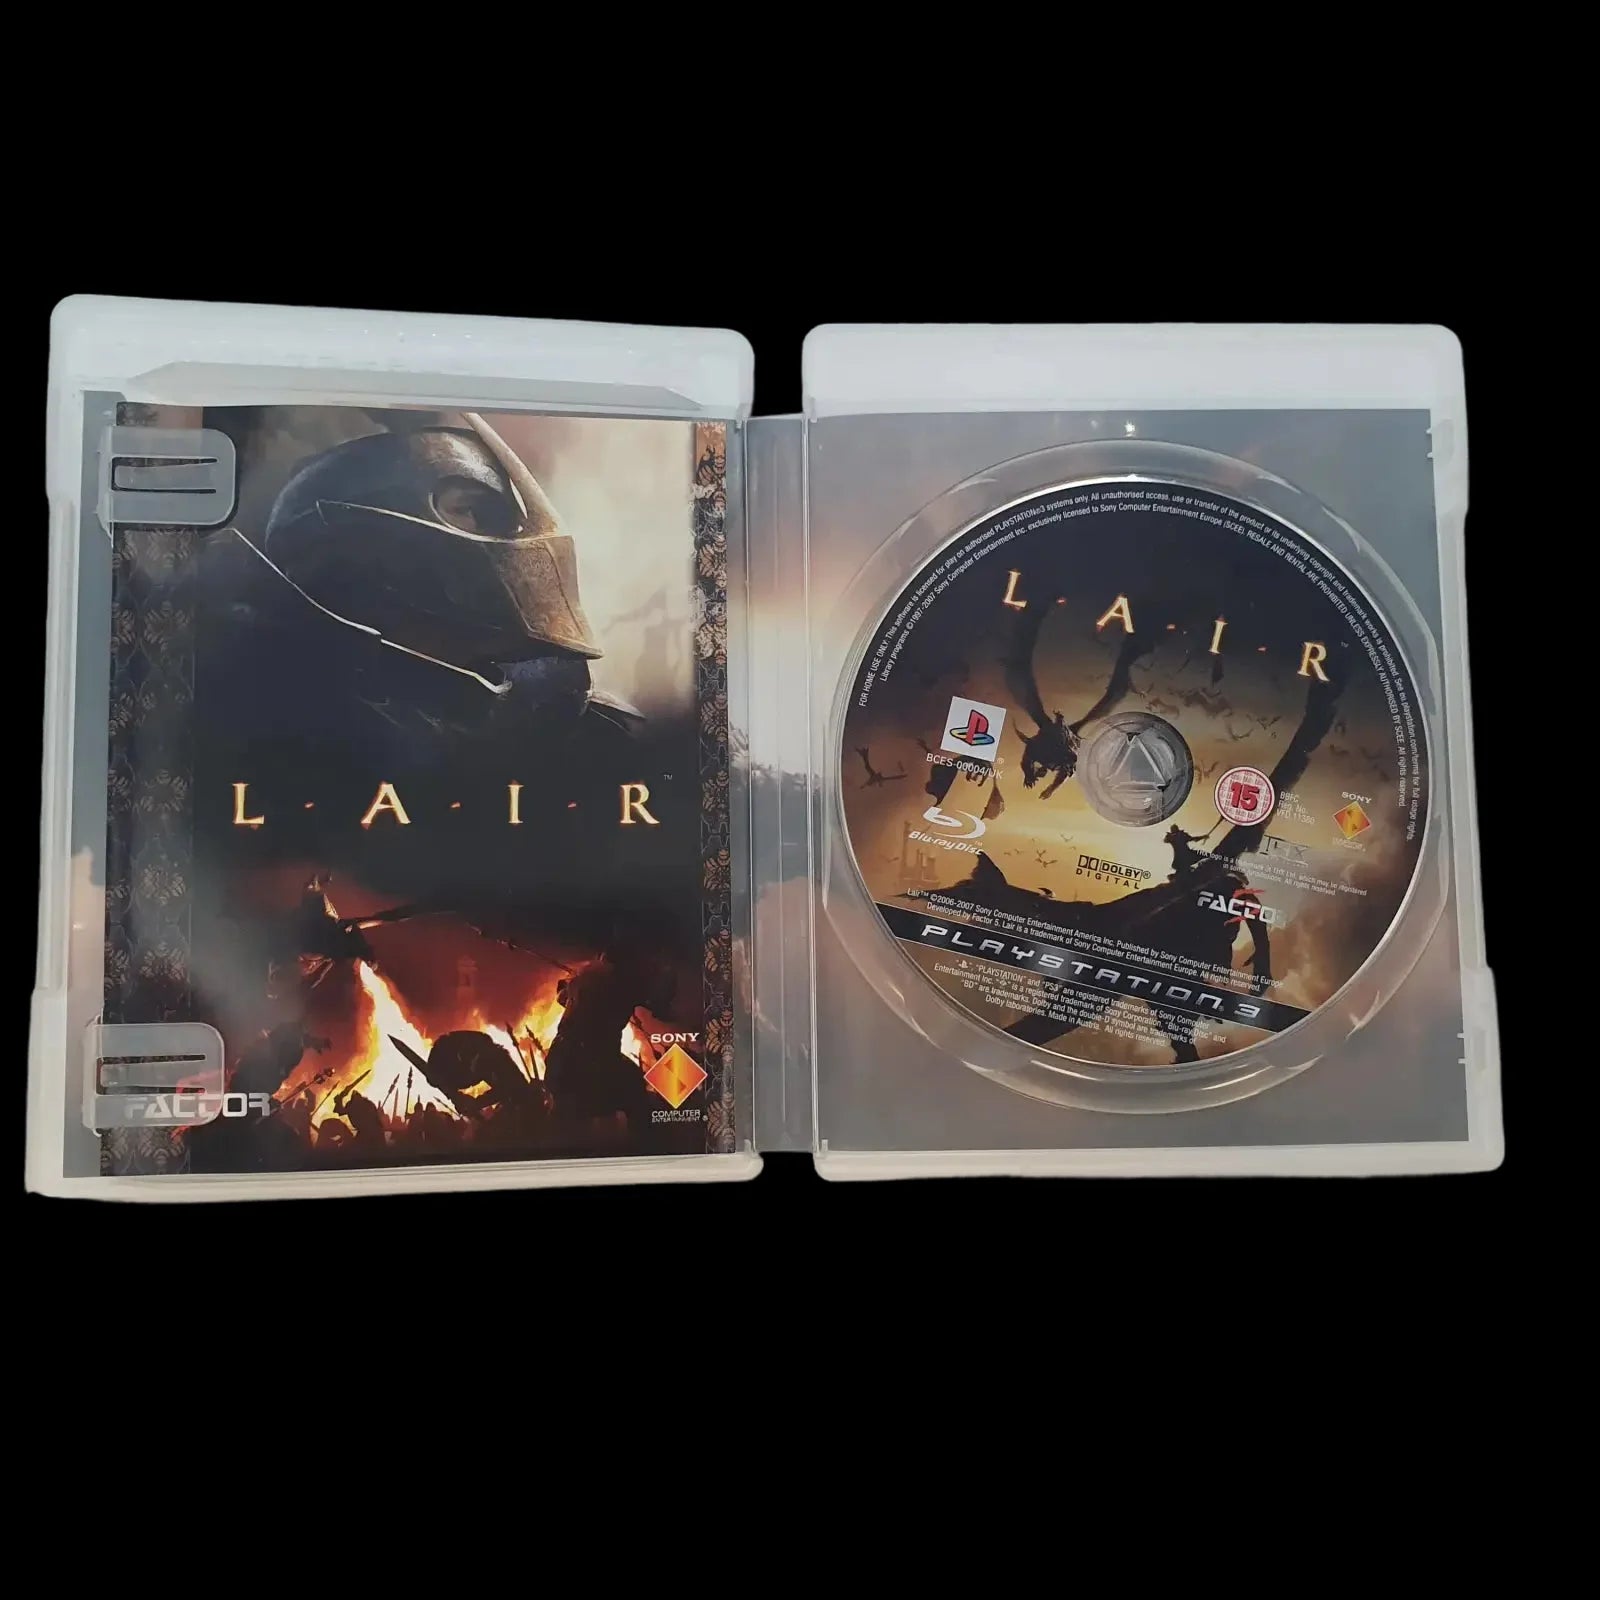 Lair Sony Playstation 3 Factor 5 2007 Video Game Cib